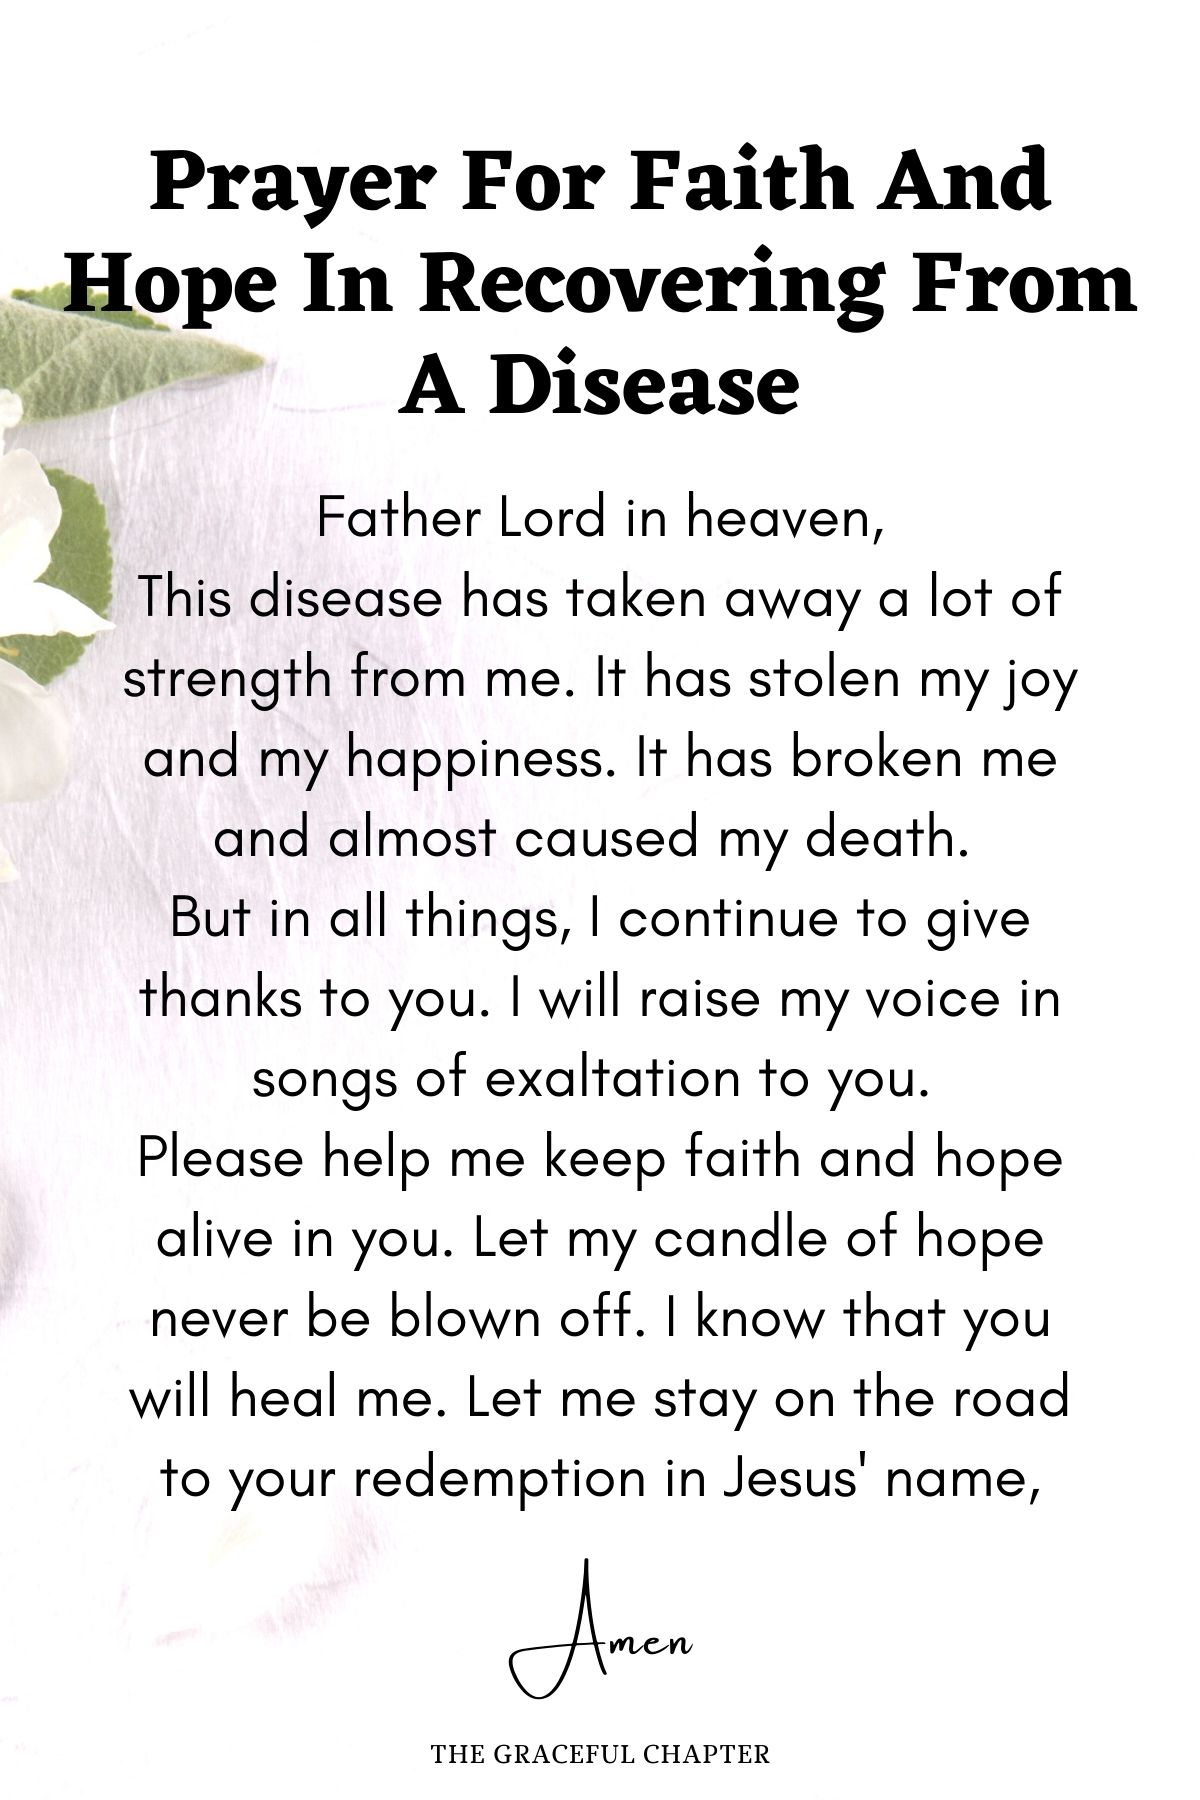 Prayer for faith and hope in recovering from a disease